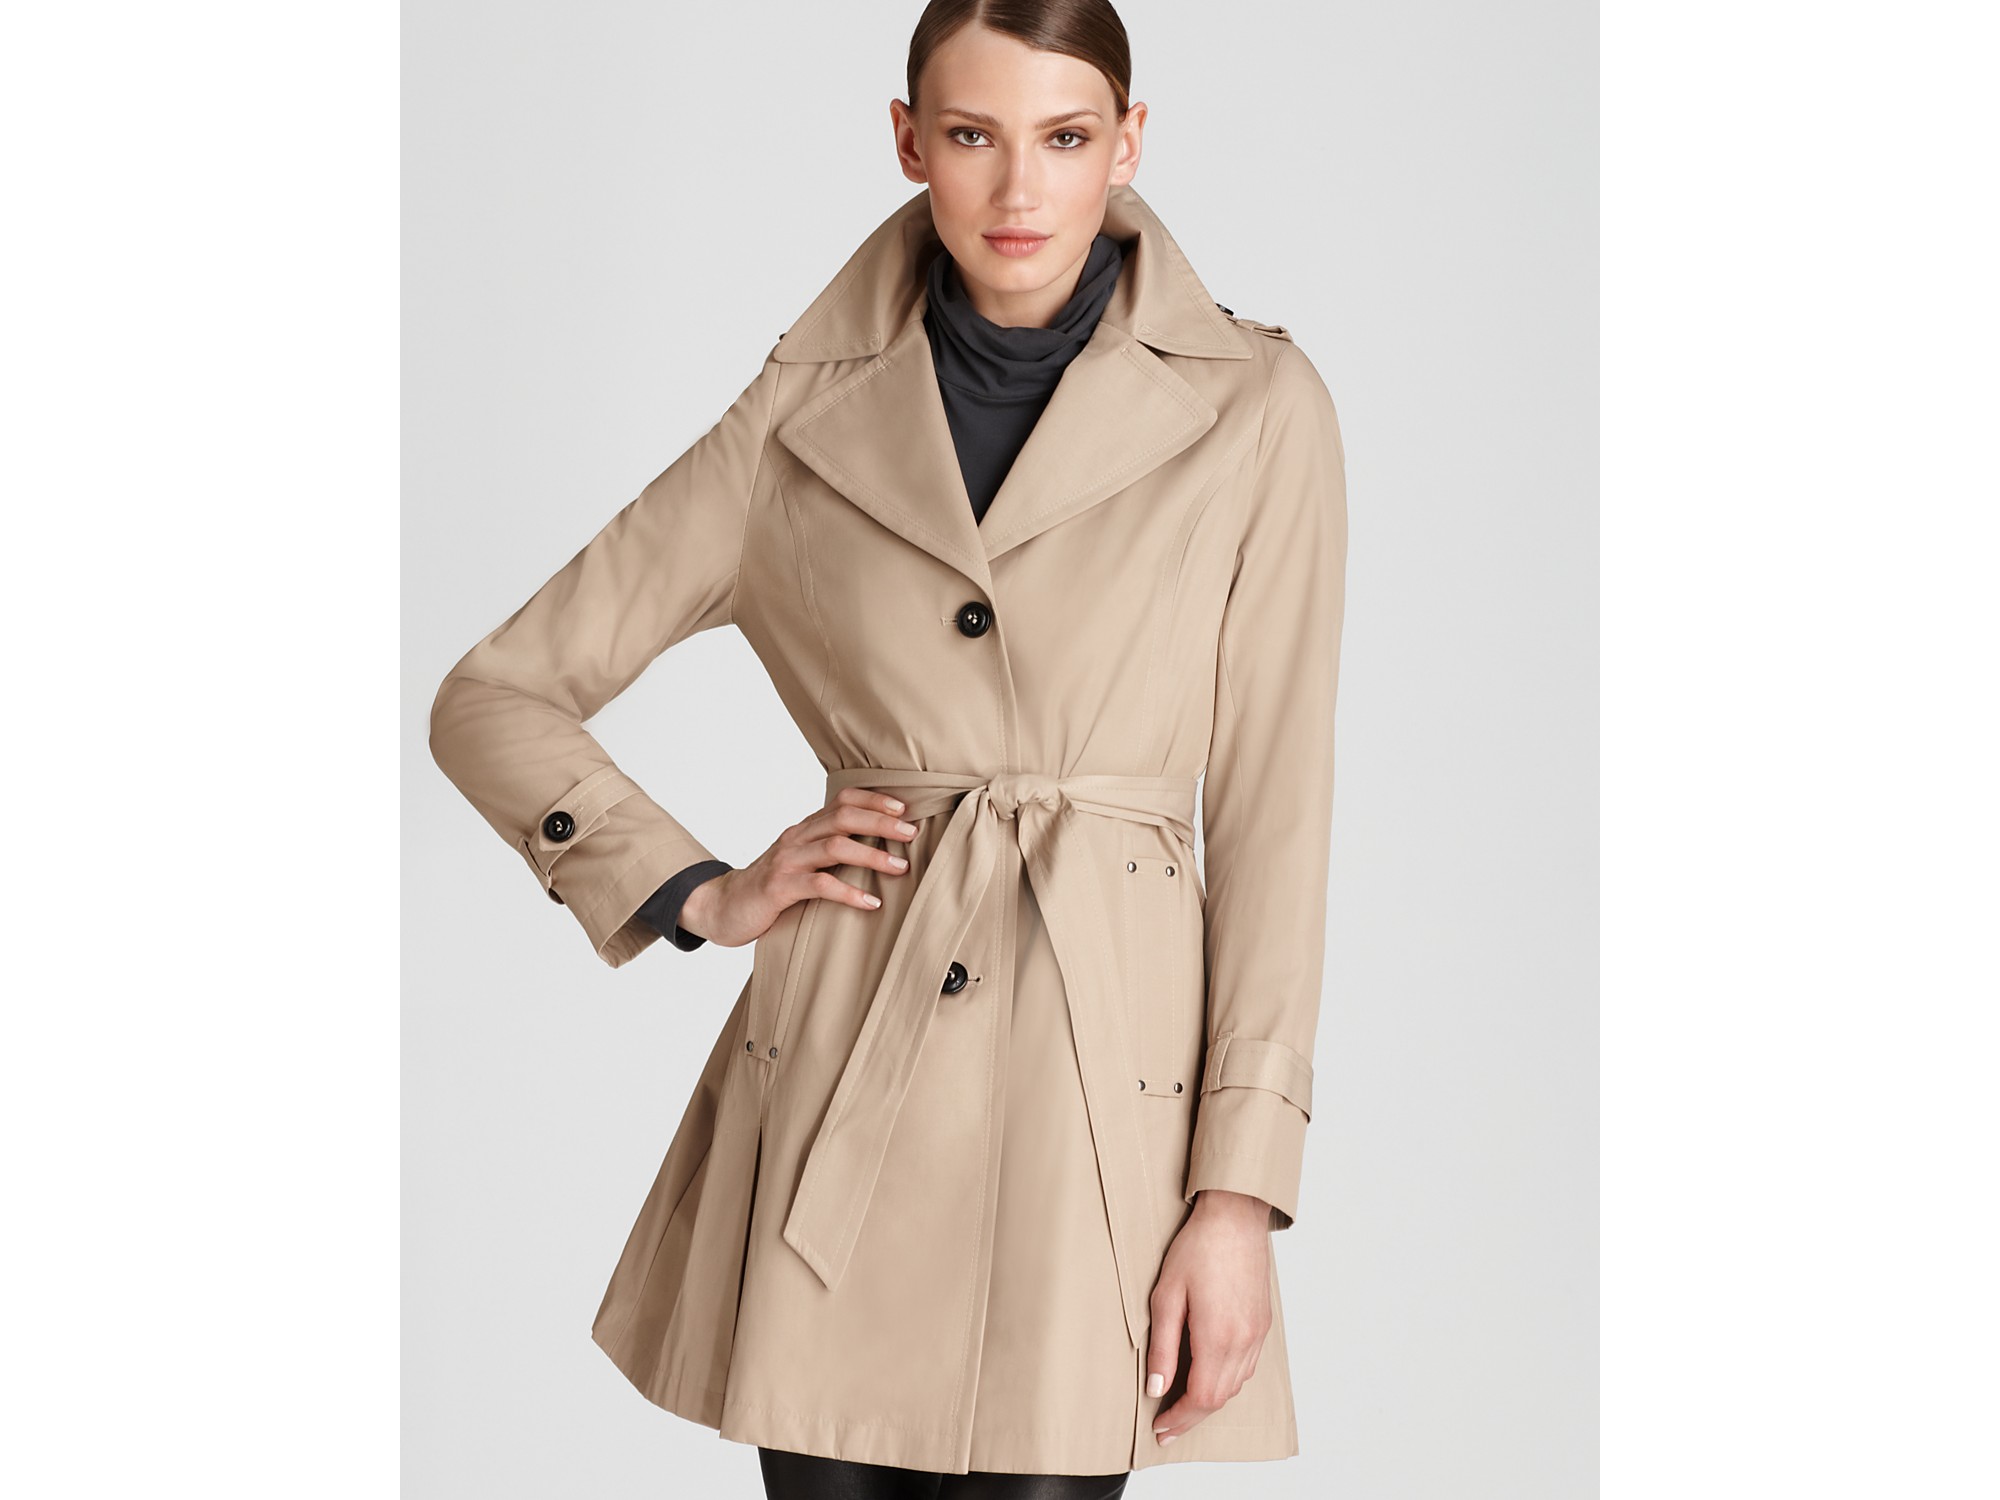 Lyst - Dkny Melissa Trench Coat with Belt in Natural